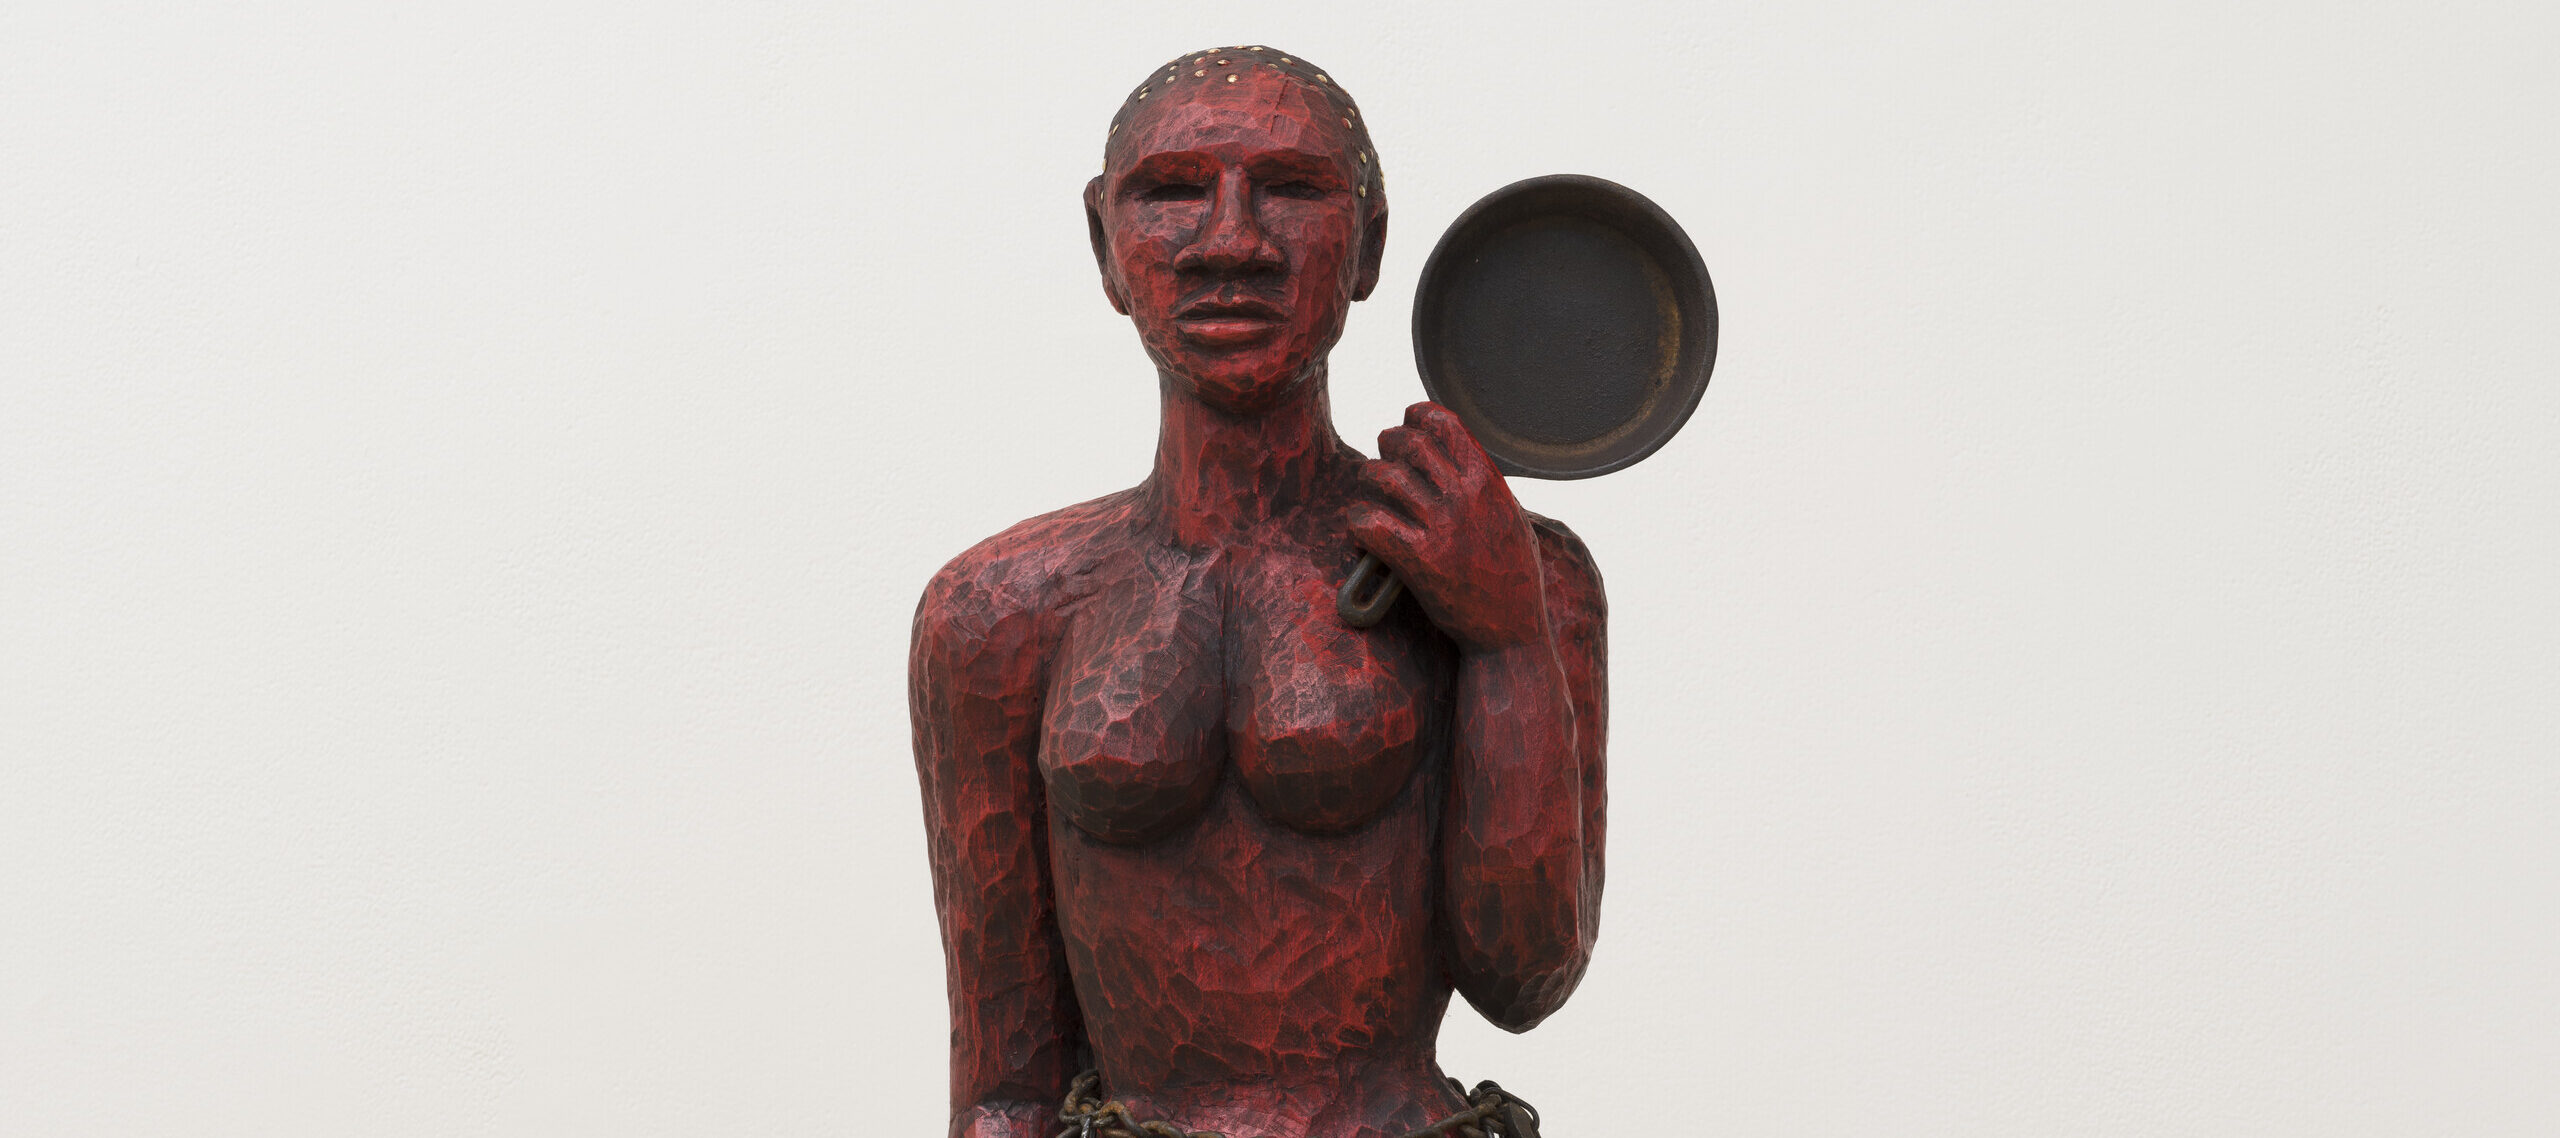 A red painted wooden sculpture of a woman holding a cast iron skillet in her left hand. She has a heavy chain around her waist with multiple skillets hanging from it like a skirt. She stands on a small wooden platform.